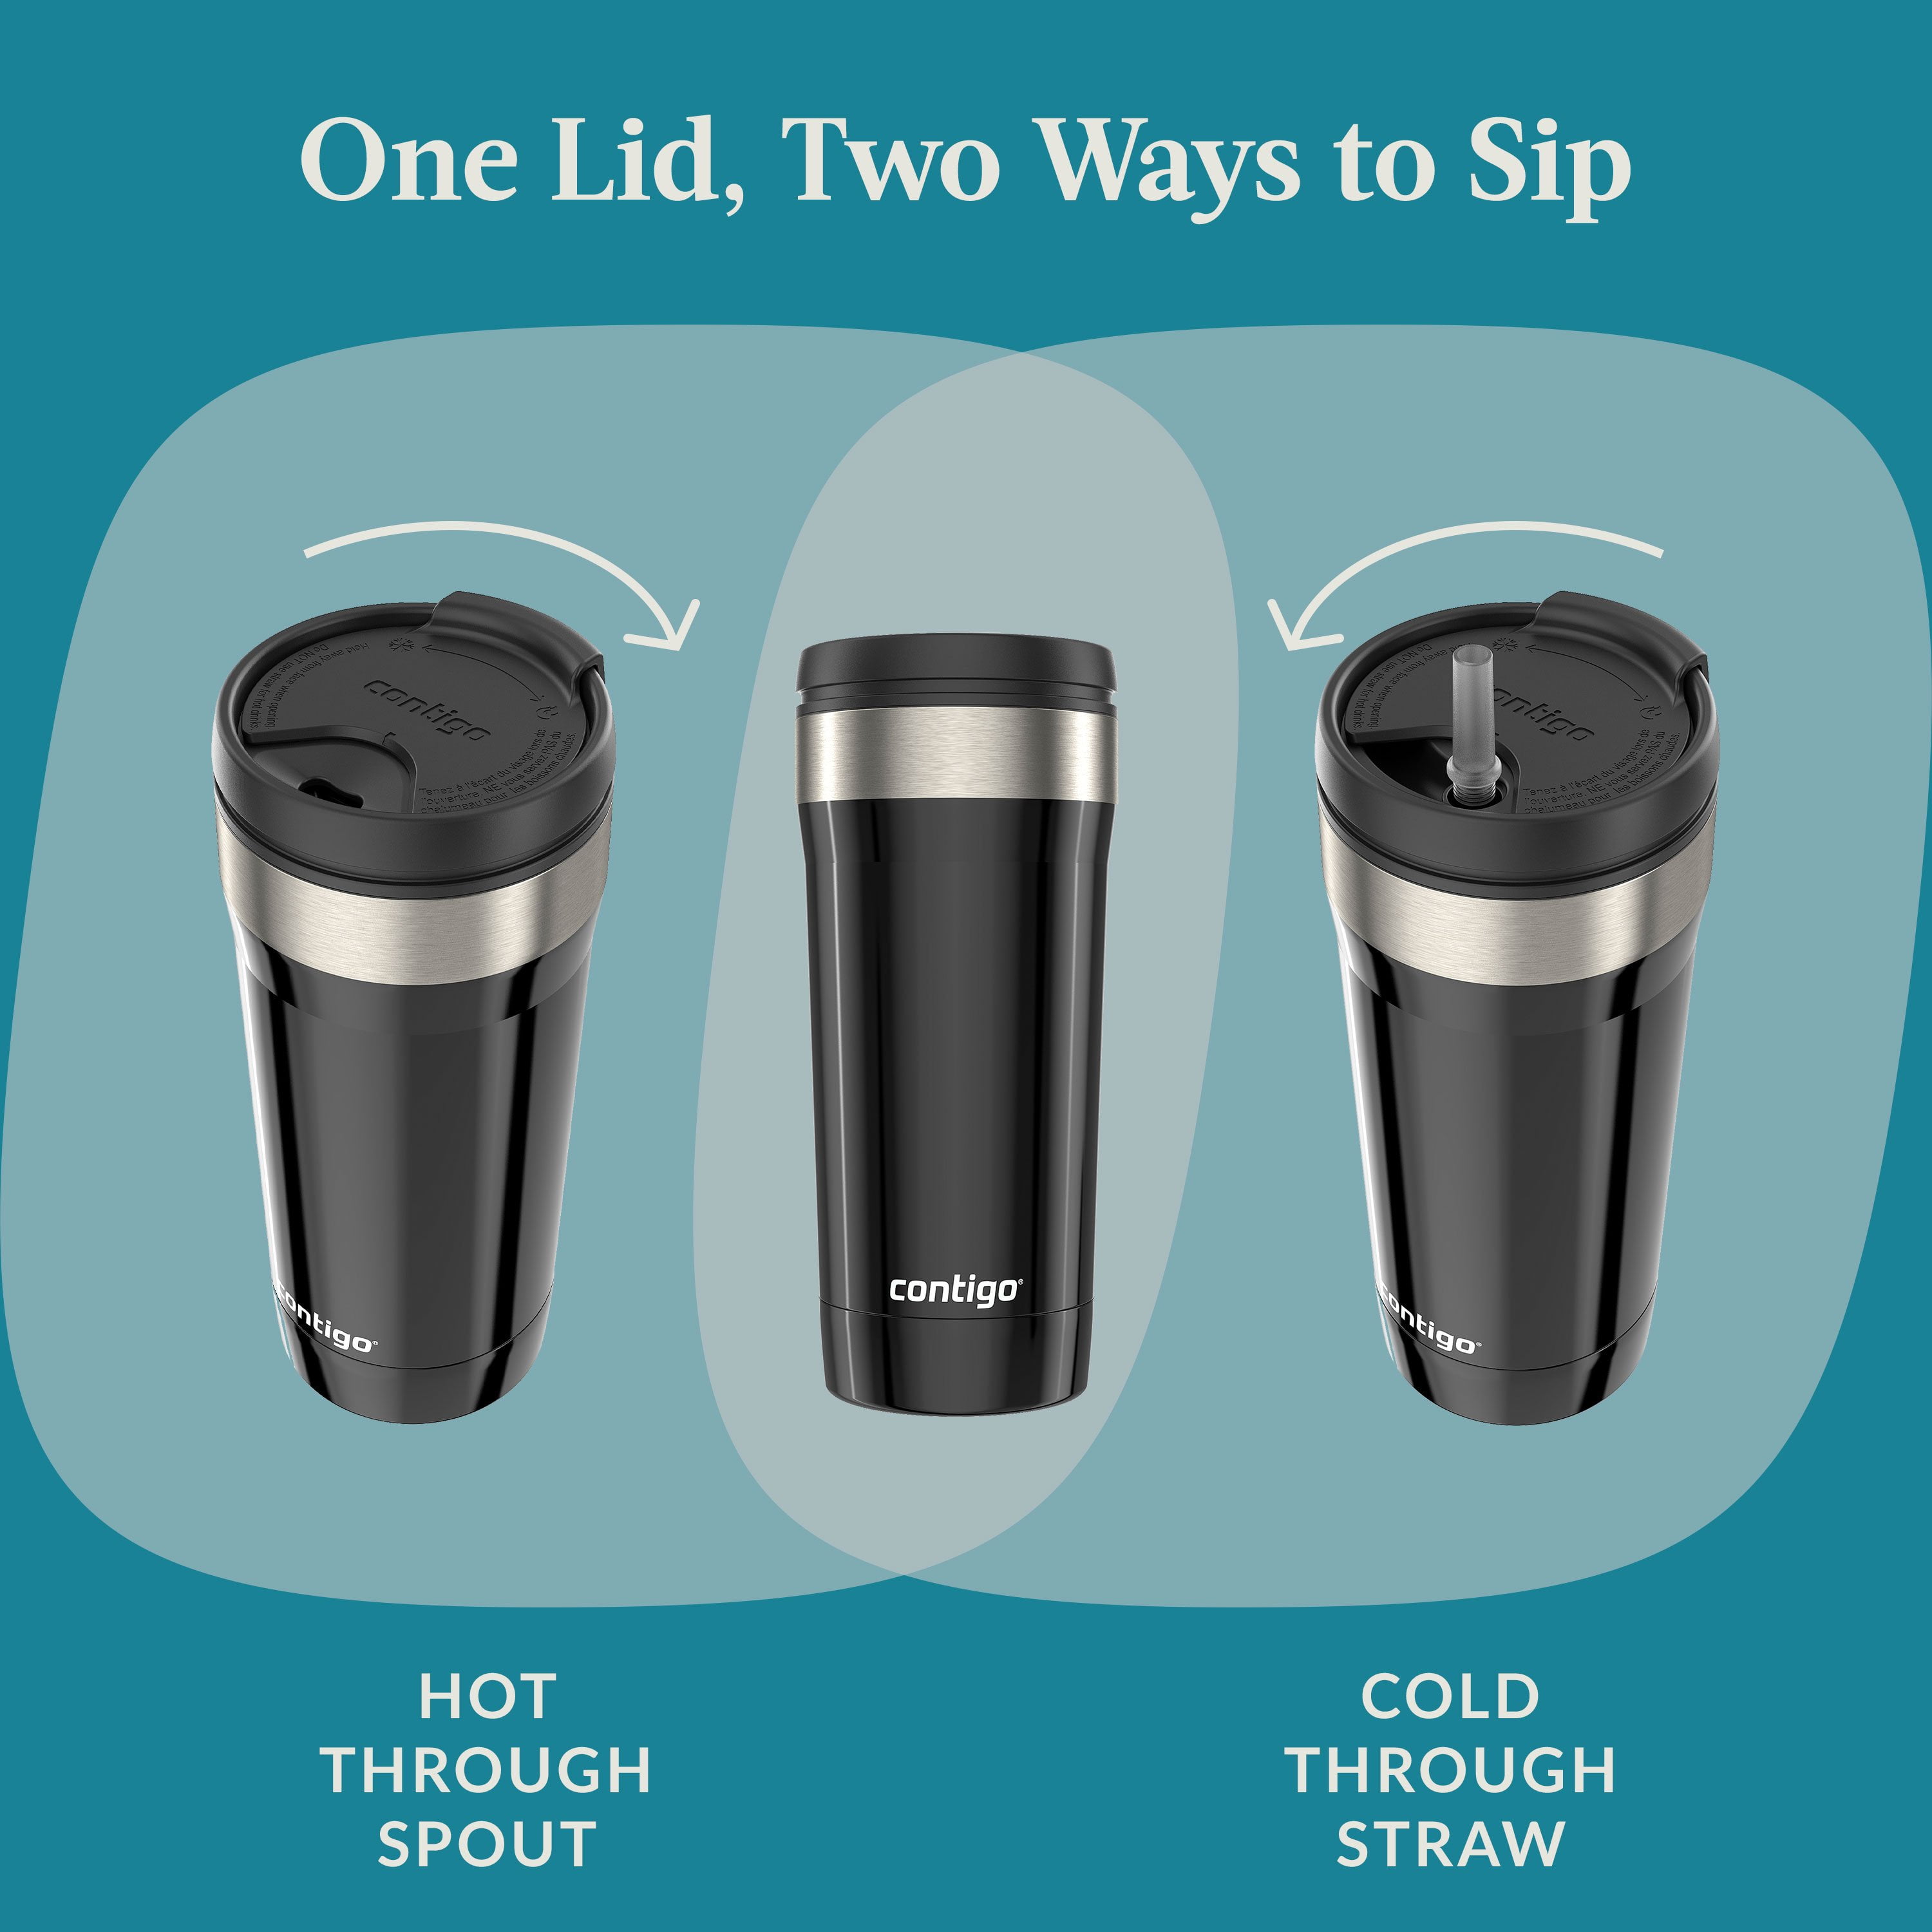 Contigo Uptown Dual-Sip Stainless Steel Tumbler with Straw in Pink, 18 fl  oz.